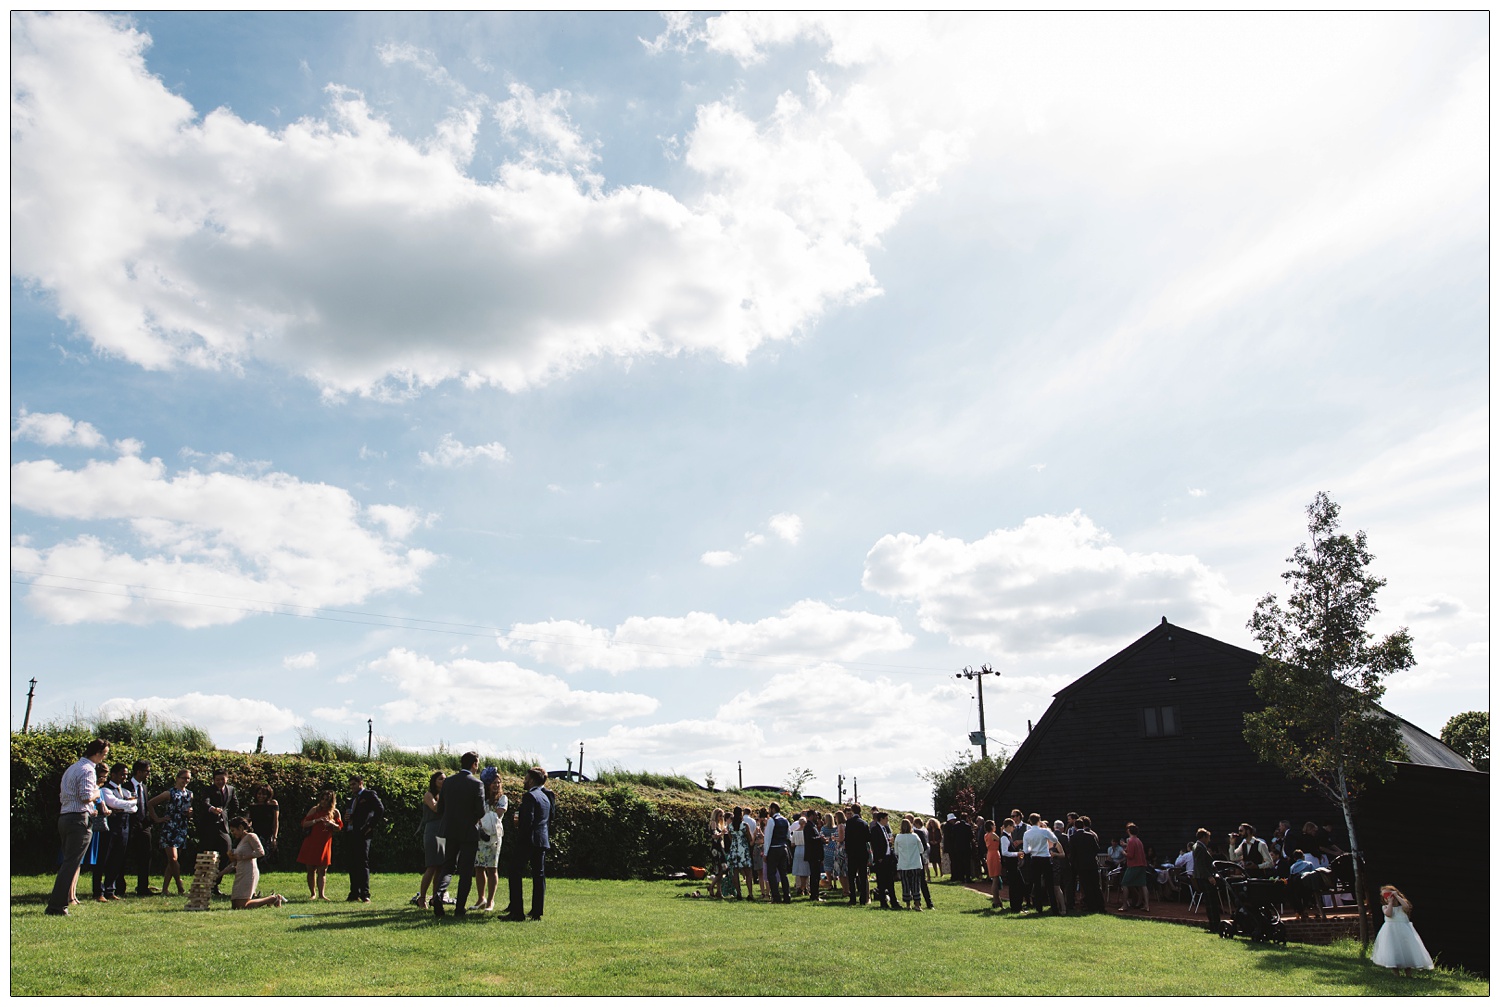 Guests in the stackyard wedding garden at Alpheton Hall Barns. The sky is blue with a few clouds. Guests are playing jenga and mingling, a small girl is taking photos.